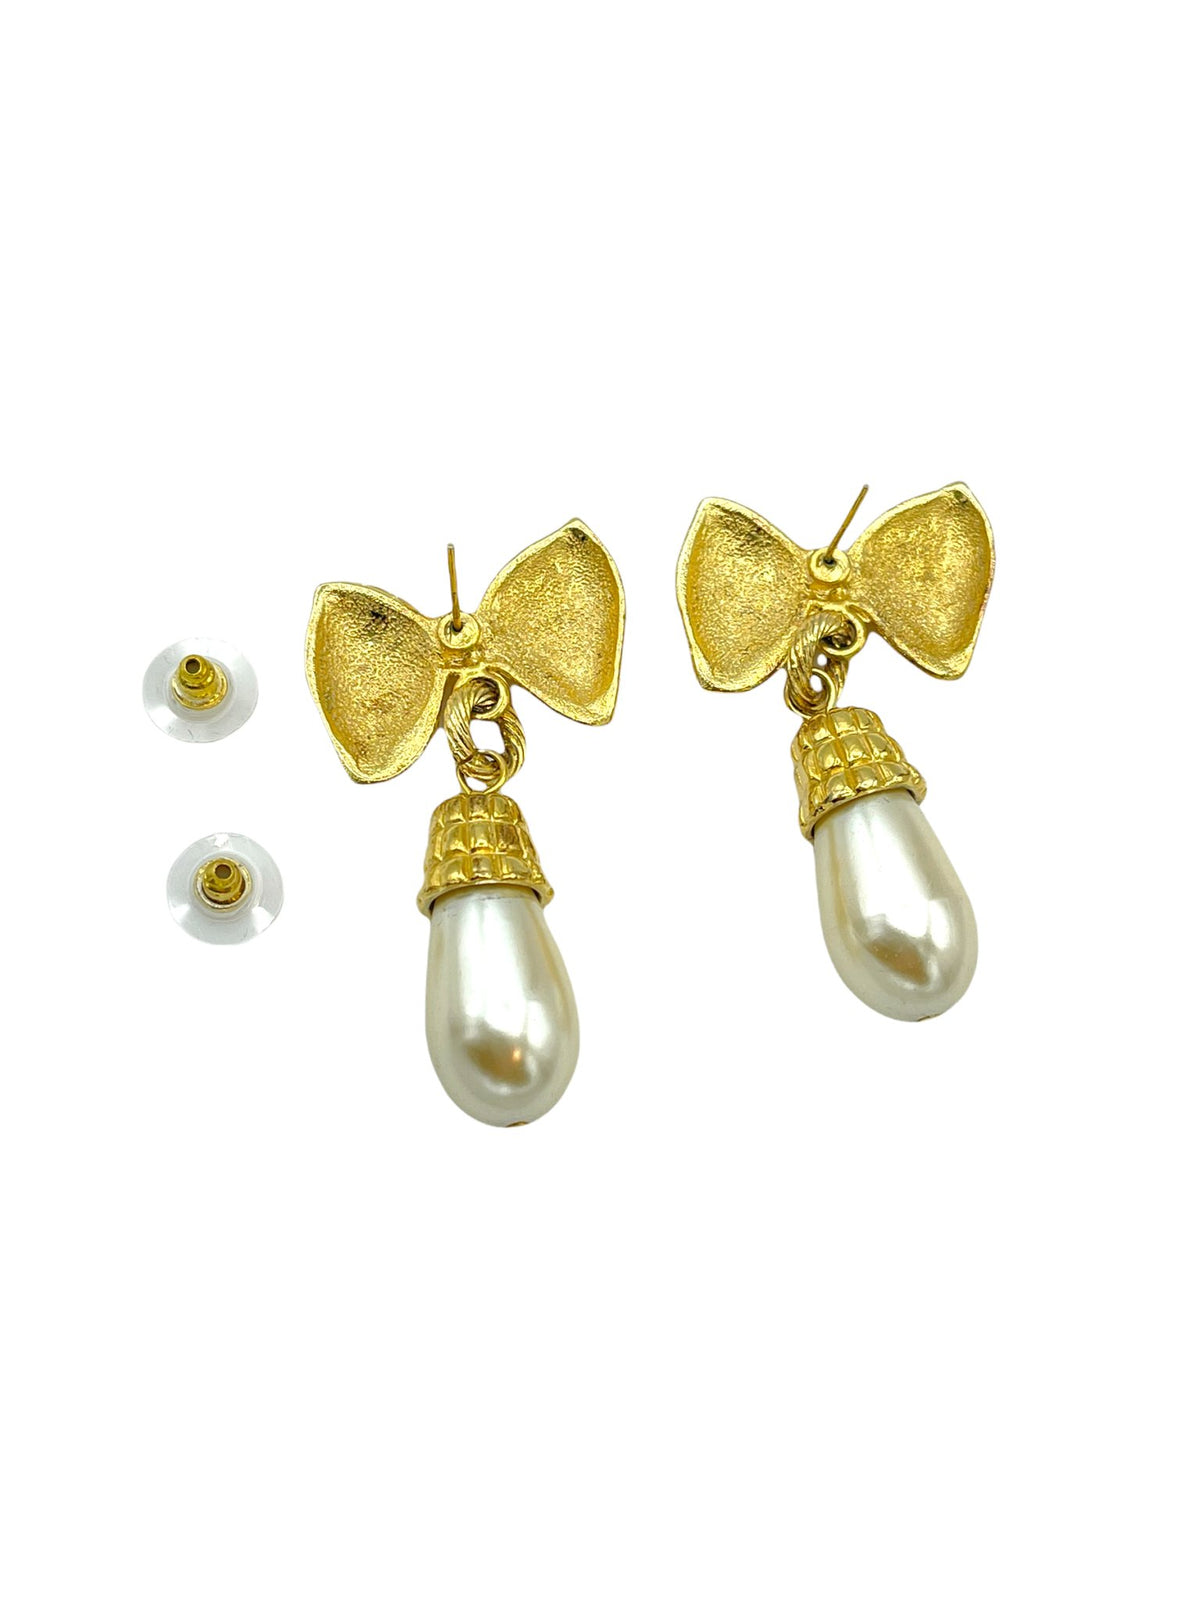 Gold Bow Pearl Drop Vintage Pierced Earrings - 24 Wishes Vintage Jewelry